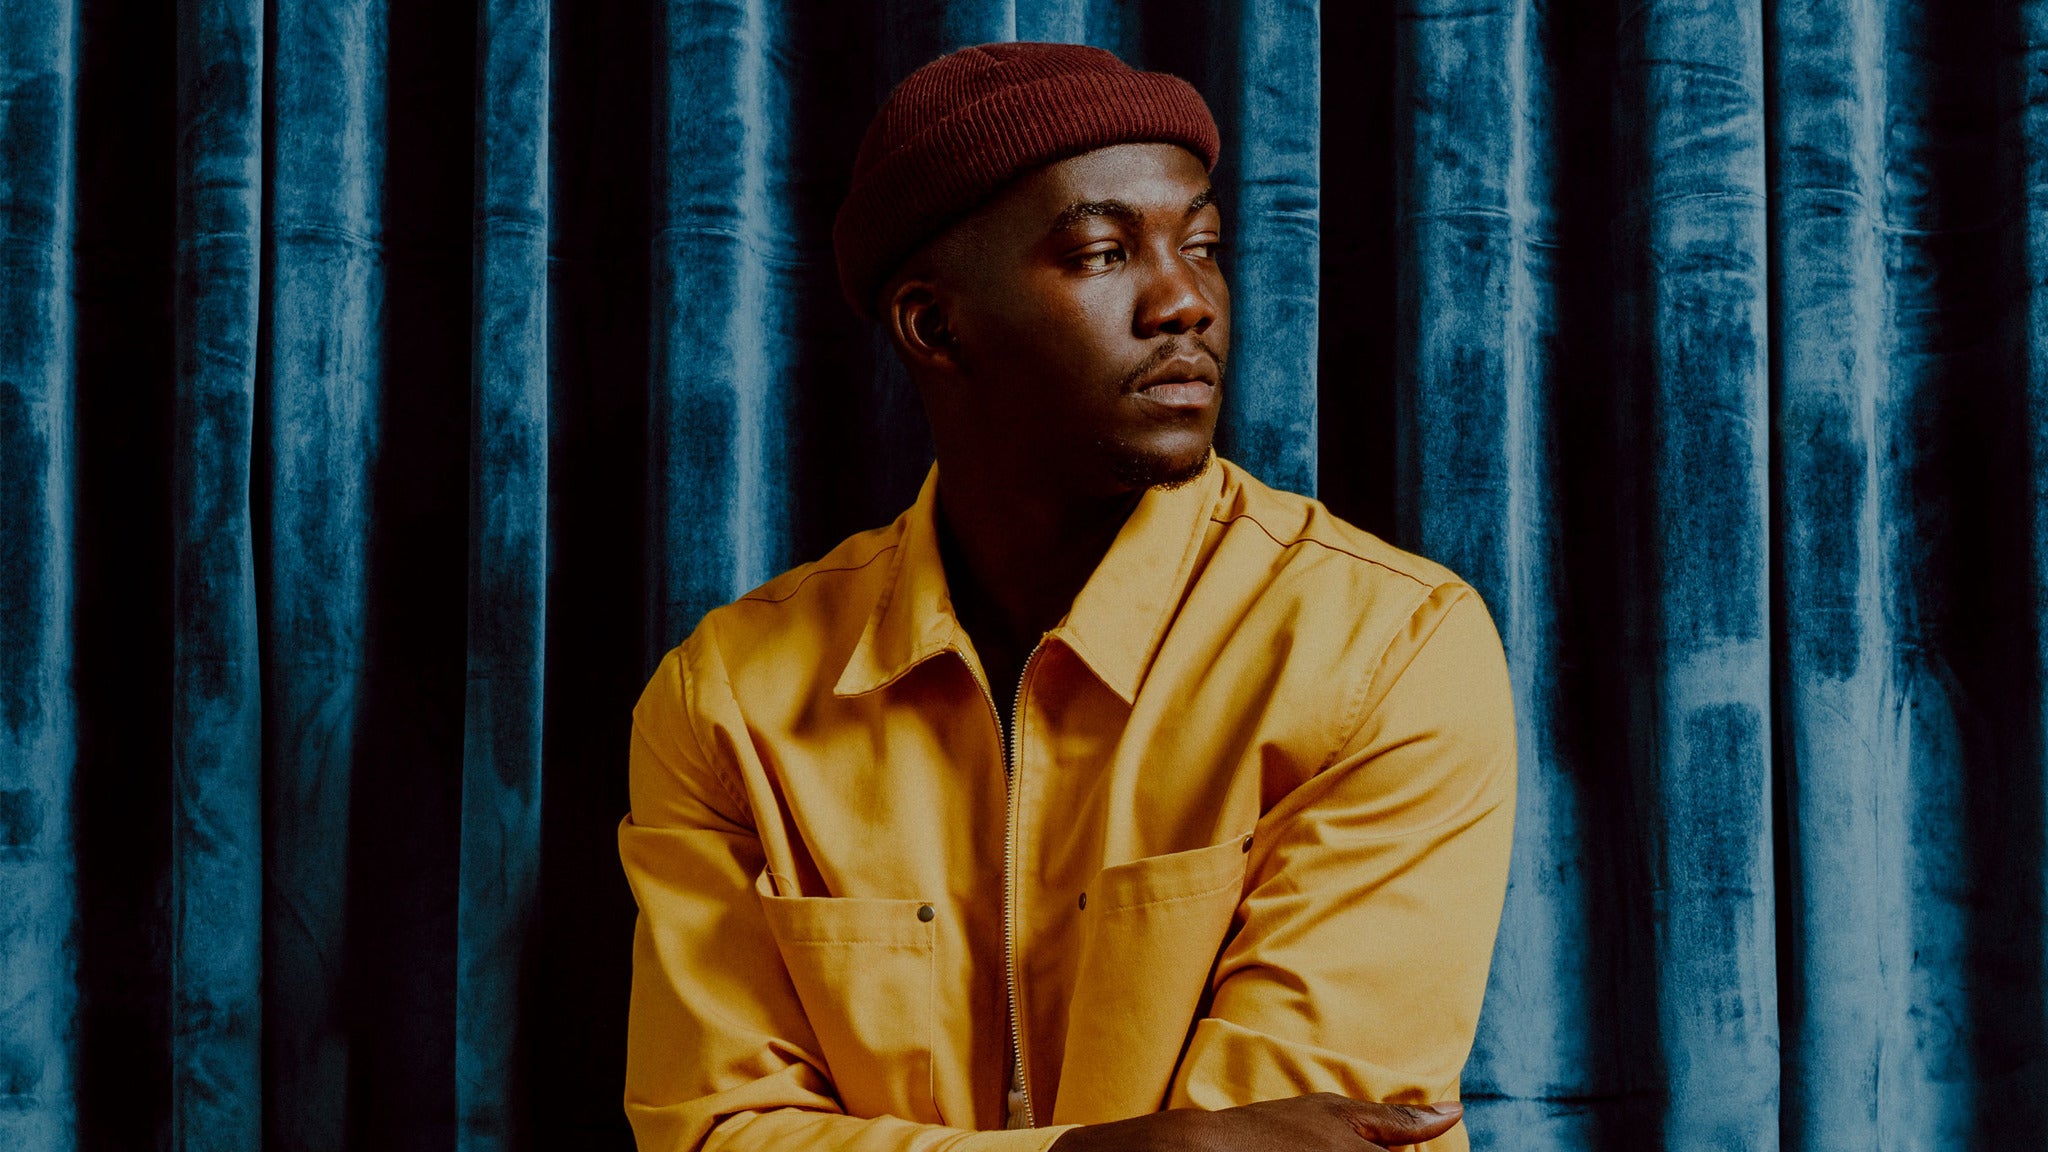 Jacob Banks in Toronto promo photo for Embrace Presents presale offer code